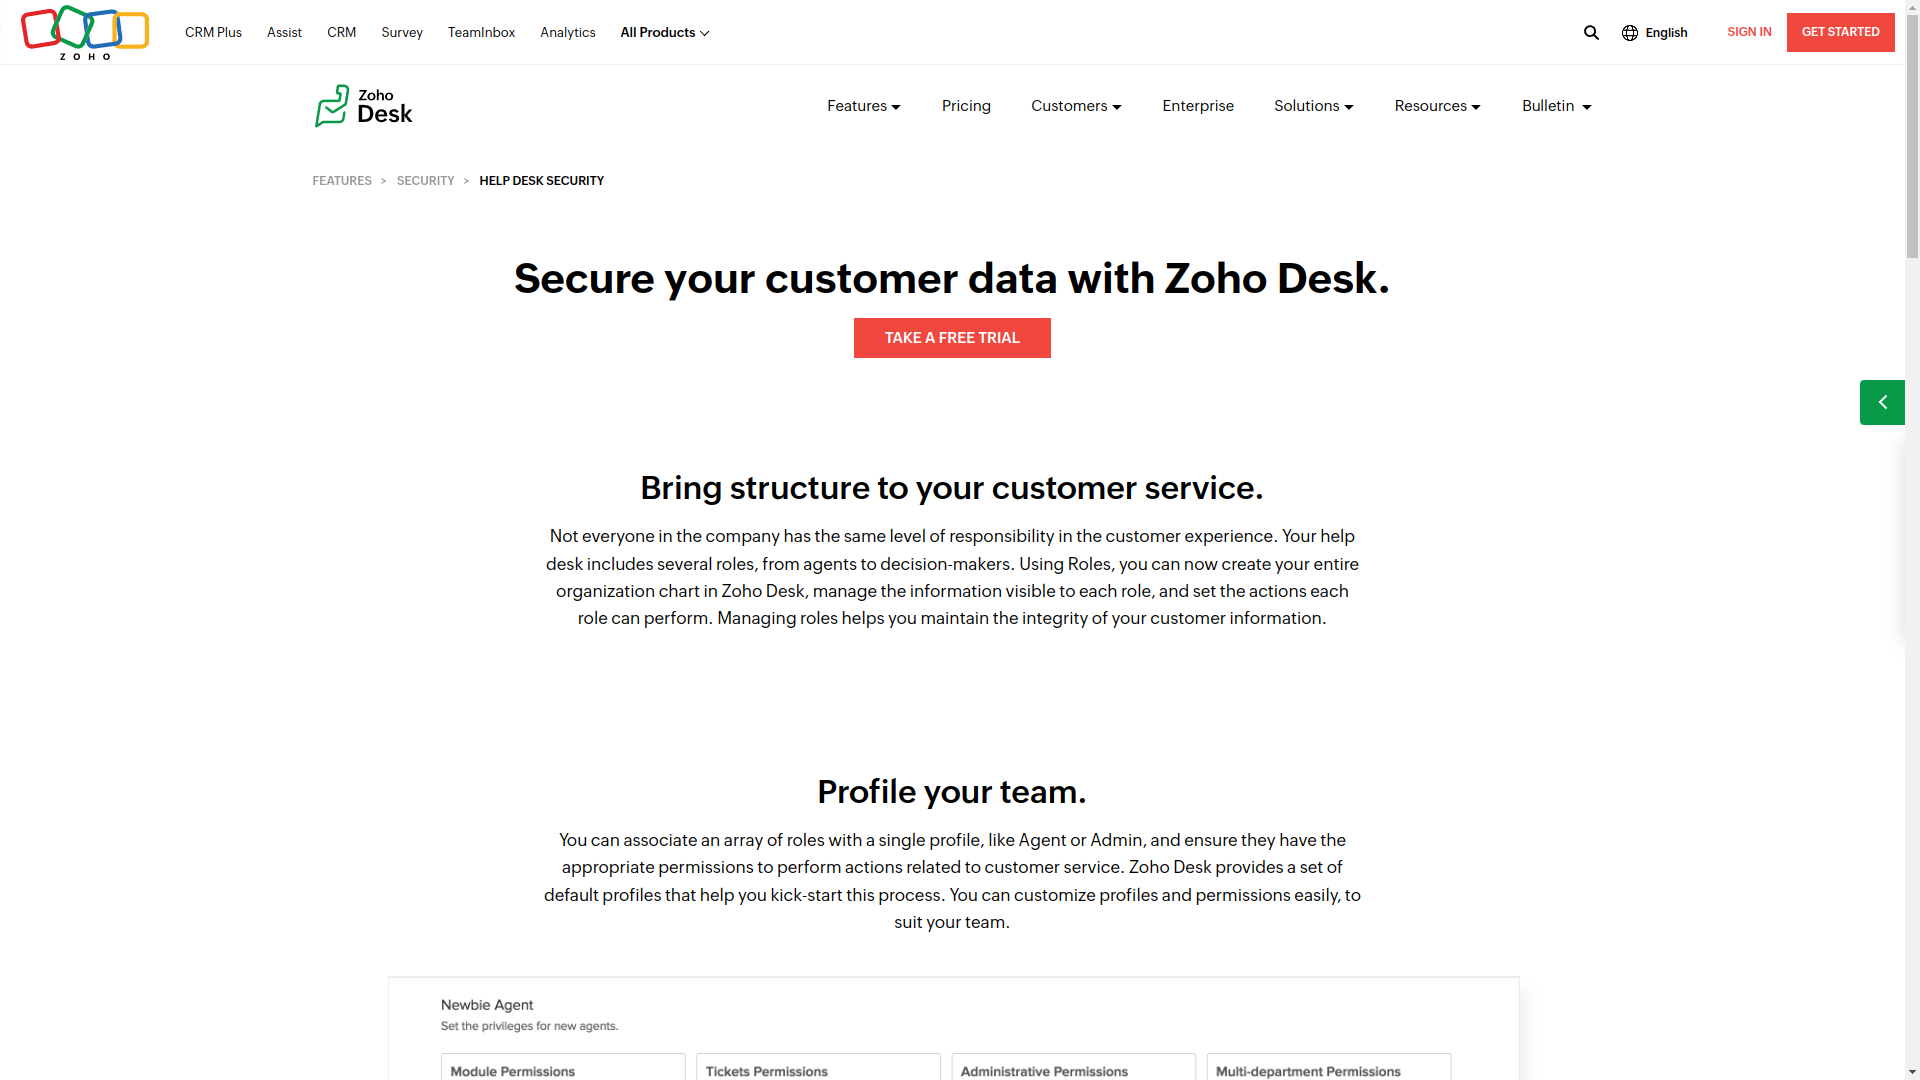 Zoho Desk security page